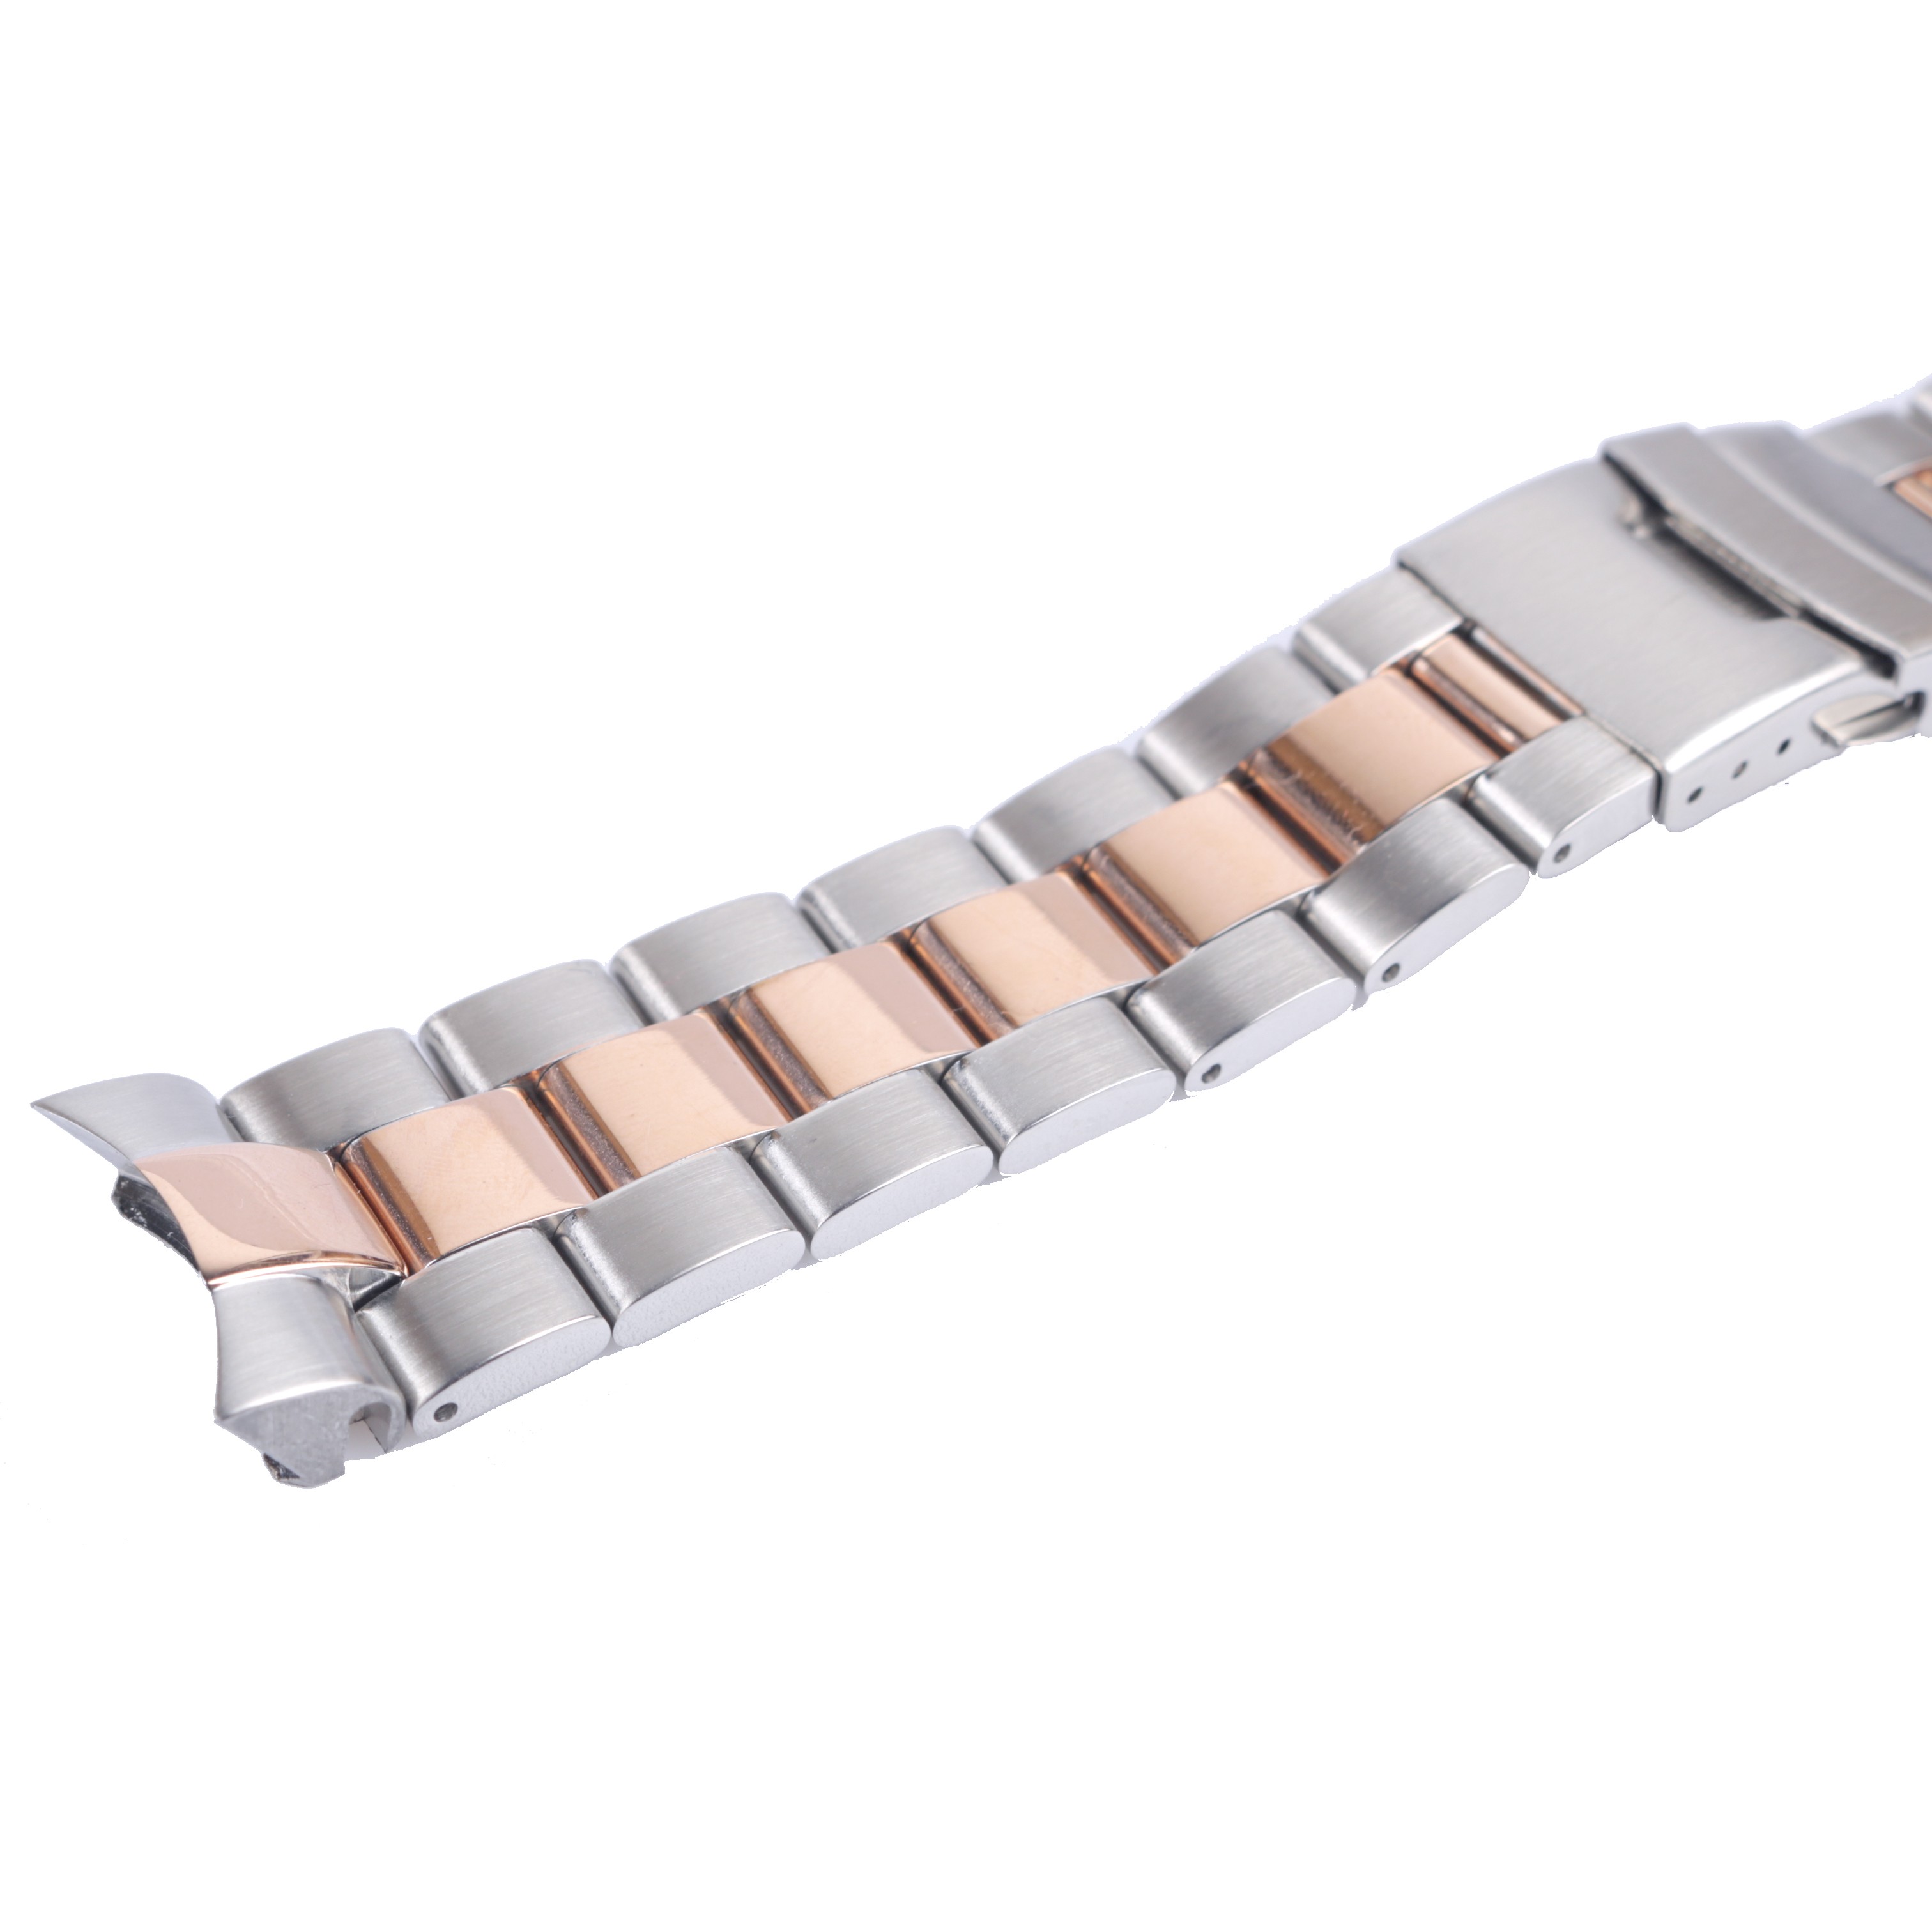 Carliwit 22mm Middle Pink Gold Stainless Steel Wrist Watch Band Replacement Metal Watchband Bracelet Double Push Clasp for Seiko